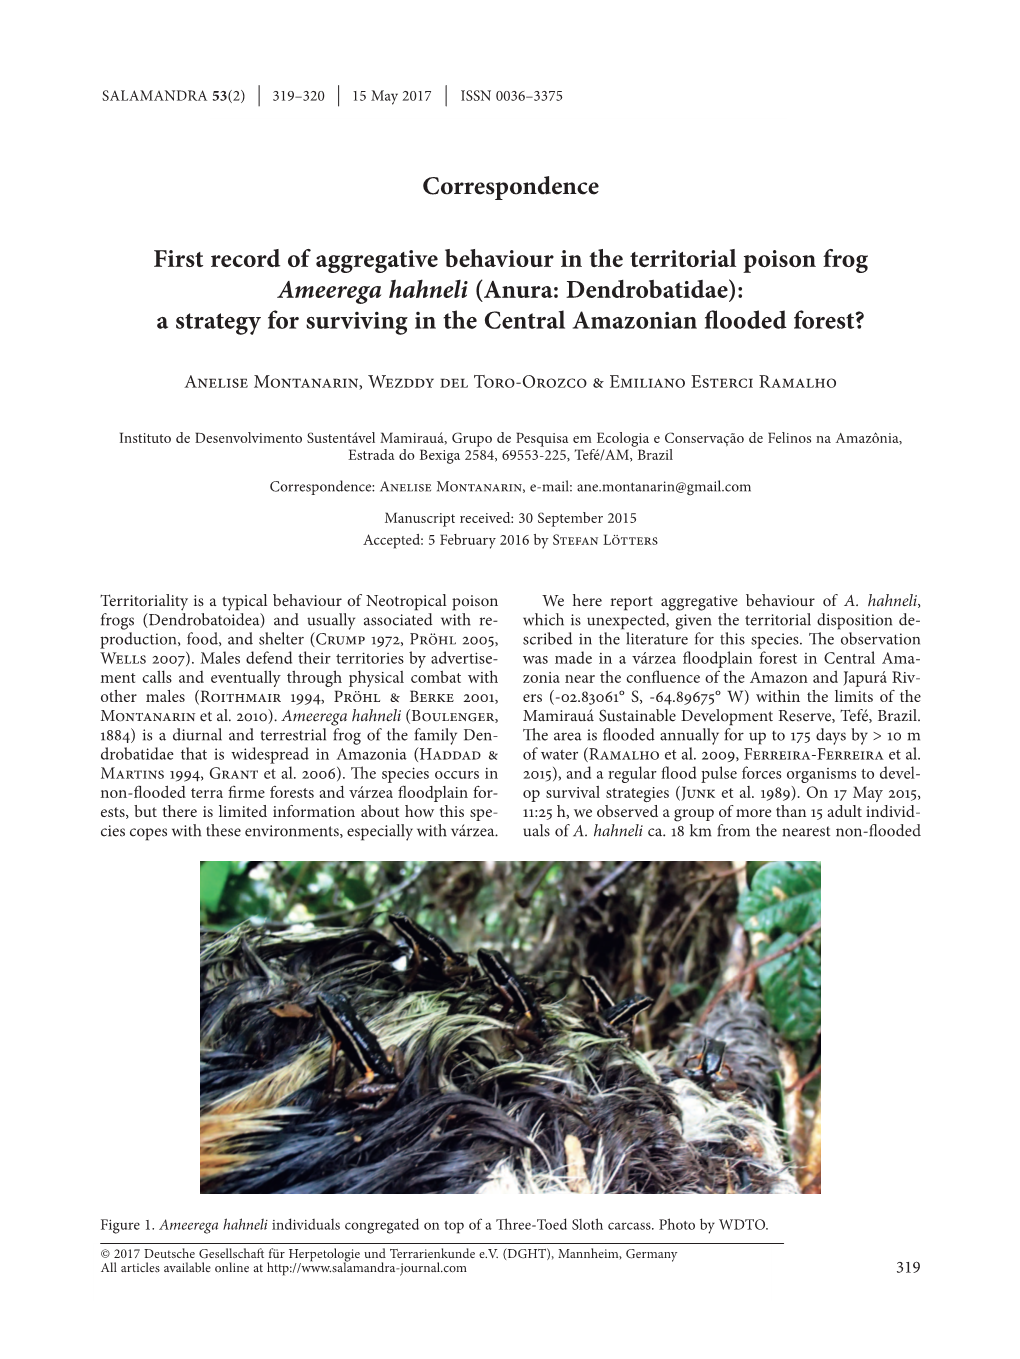 Anura: Dendrobatidae): a Strategy for Surviving in the Central Amazonian Flooded Forest?